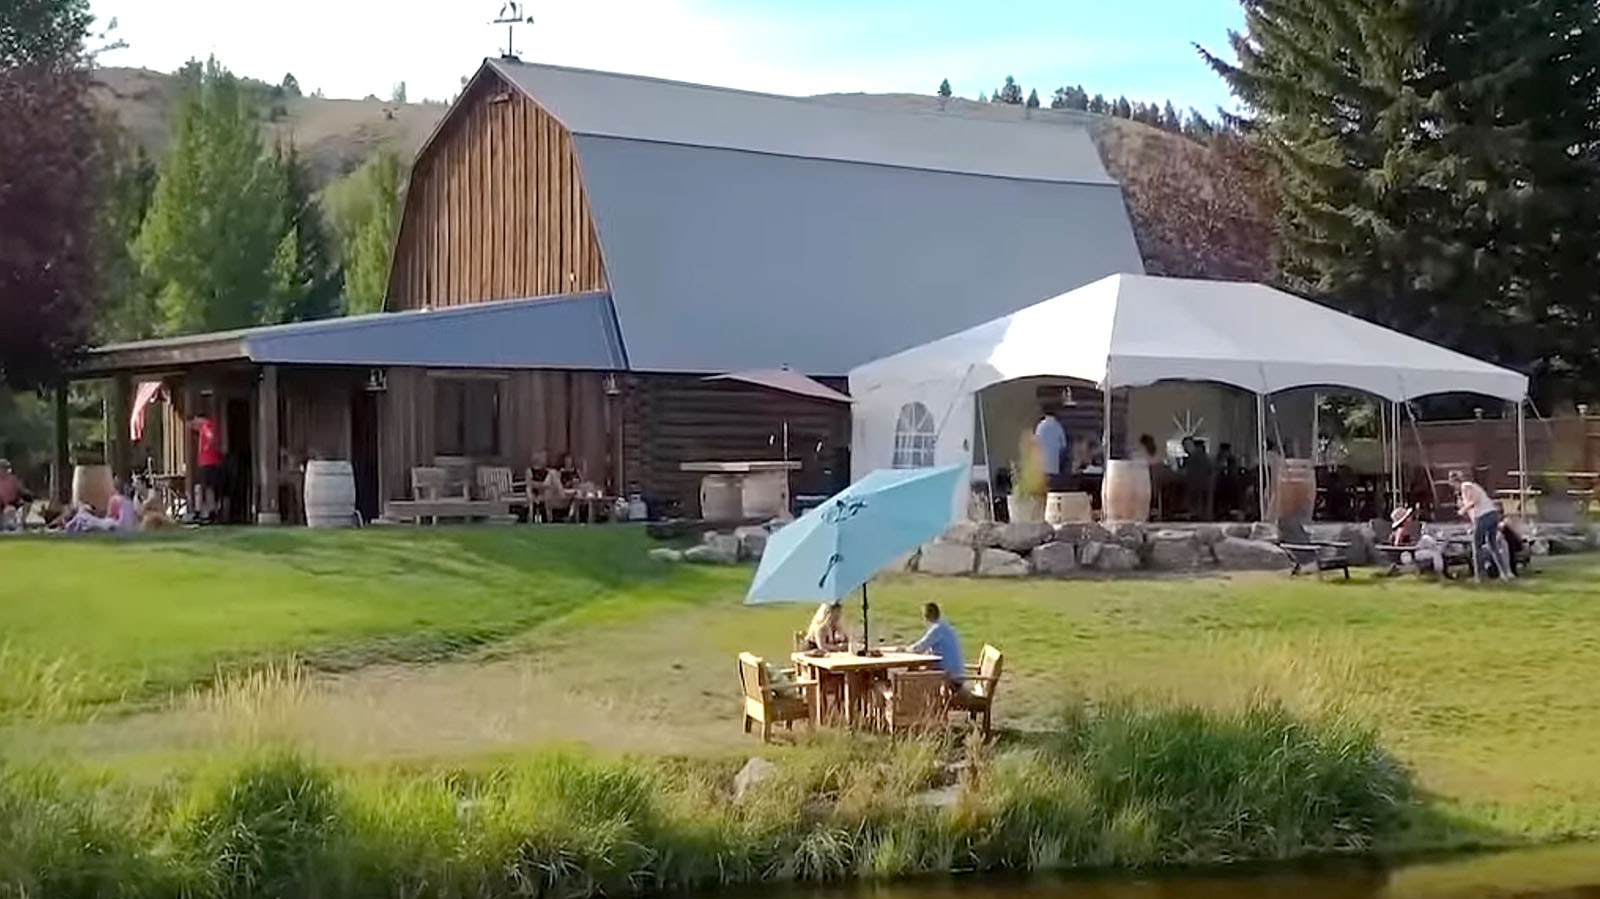 Jackson Hole Winery was featured three years ago by Jackson Hole Traveler on its YouTube channel.